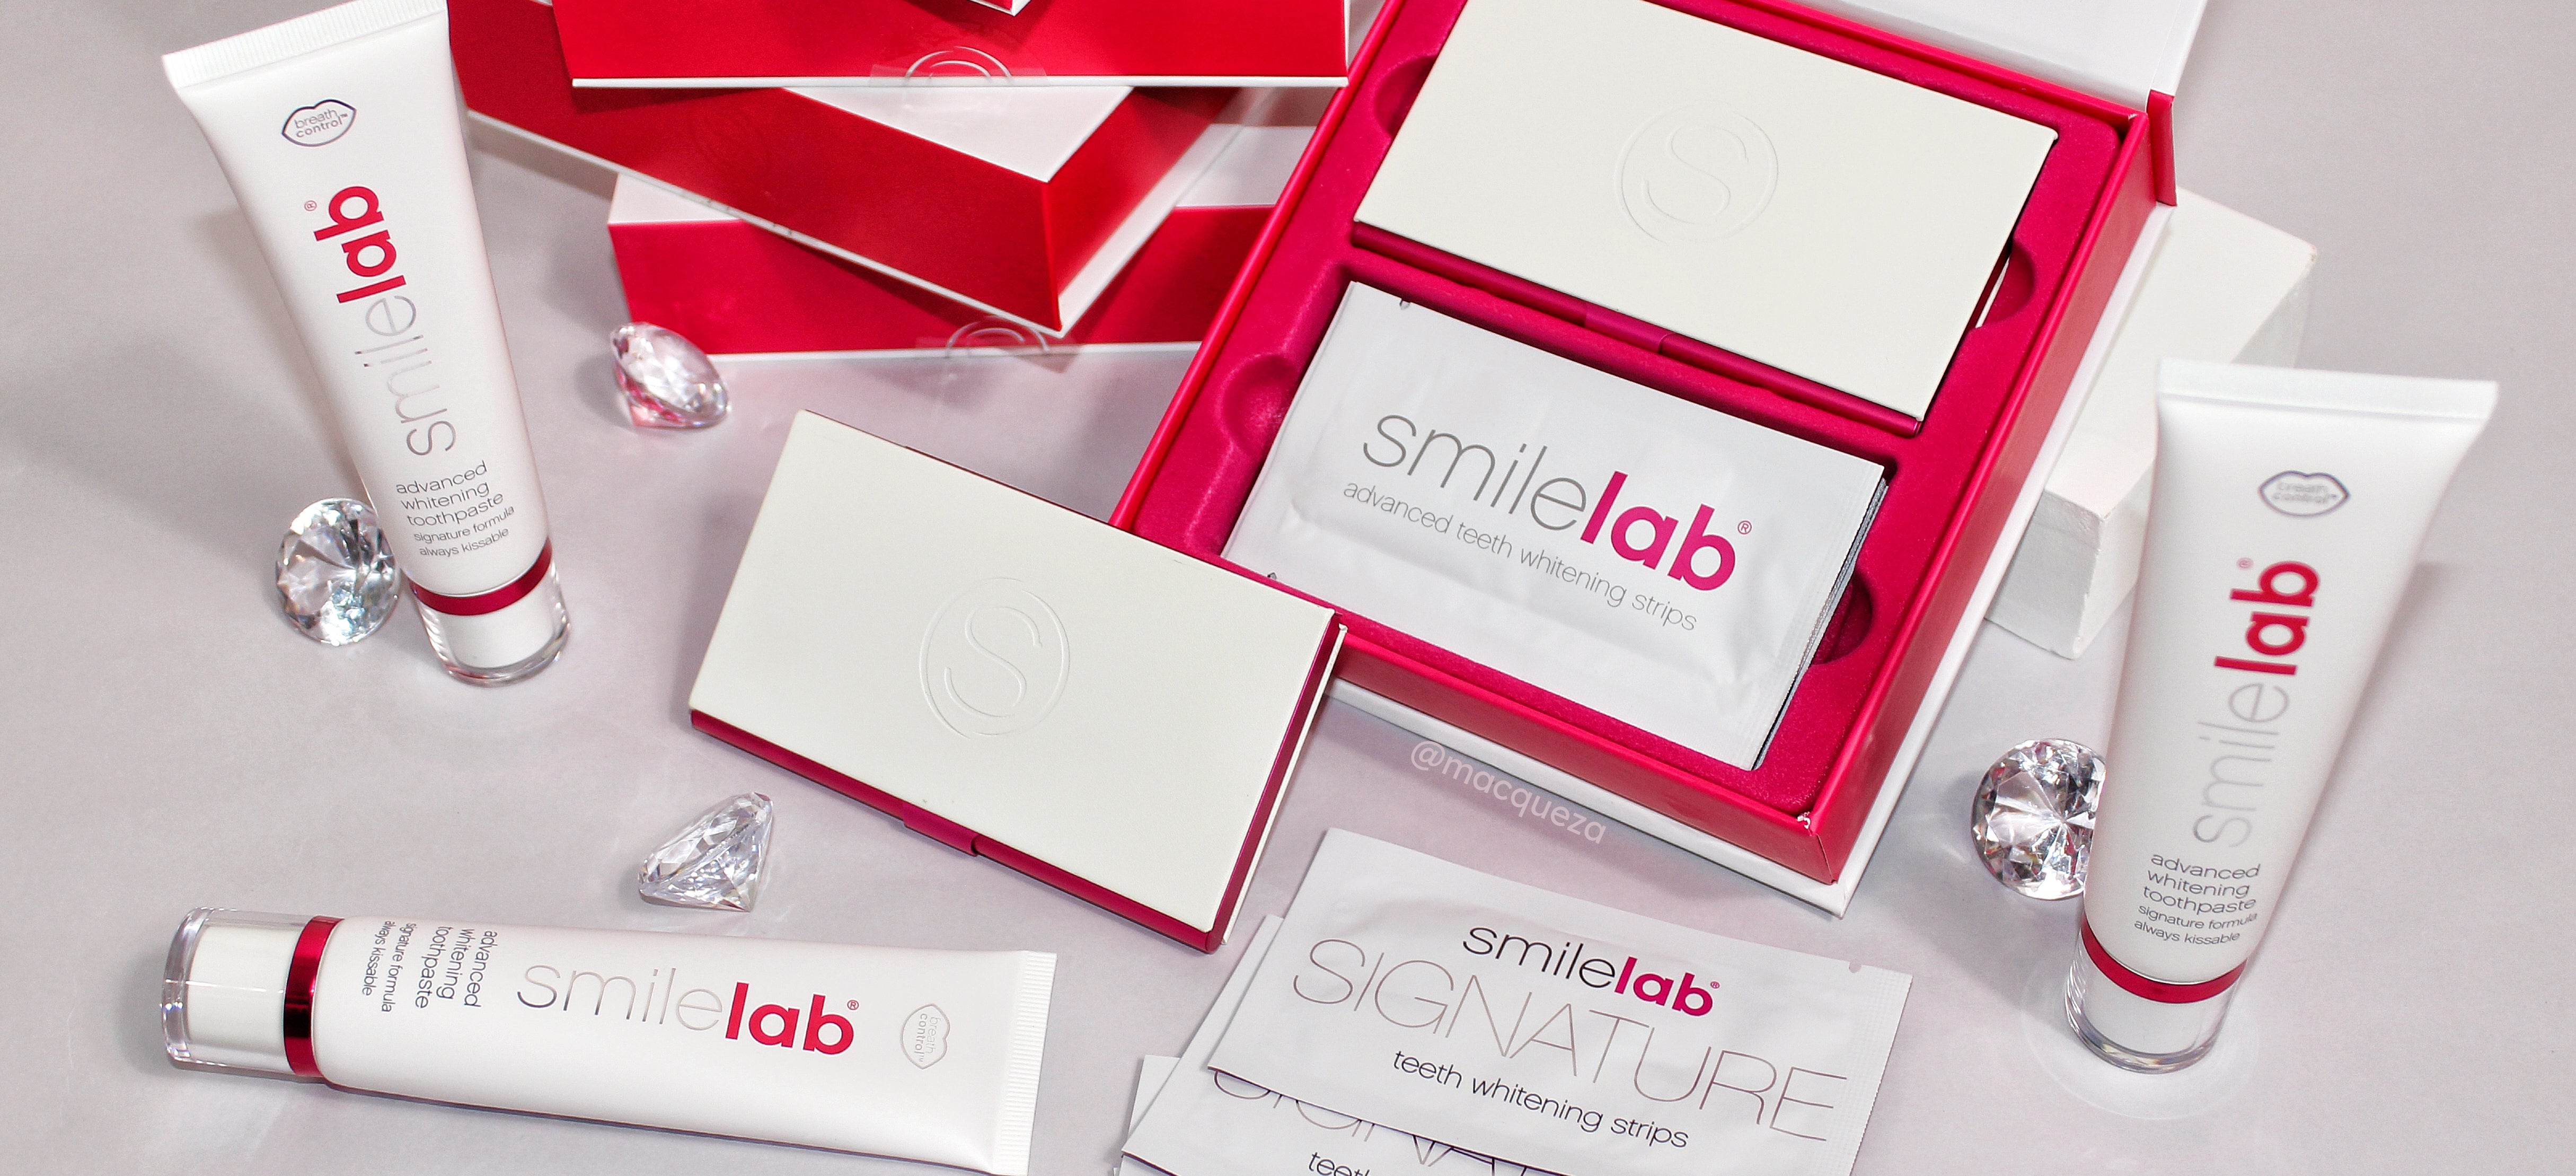 Smile Lab is an environmentally-friendly brand specialising in teeth whitening products, with its innovative and superior formula created by dentists and are proven to be 100% safe, with extremely effective and instant results.